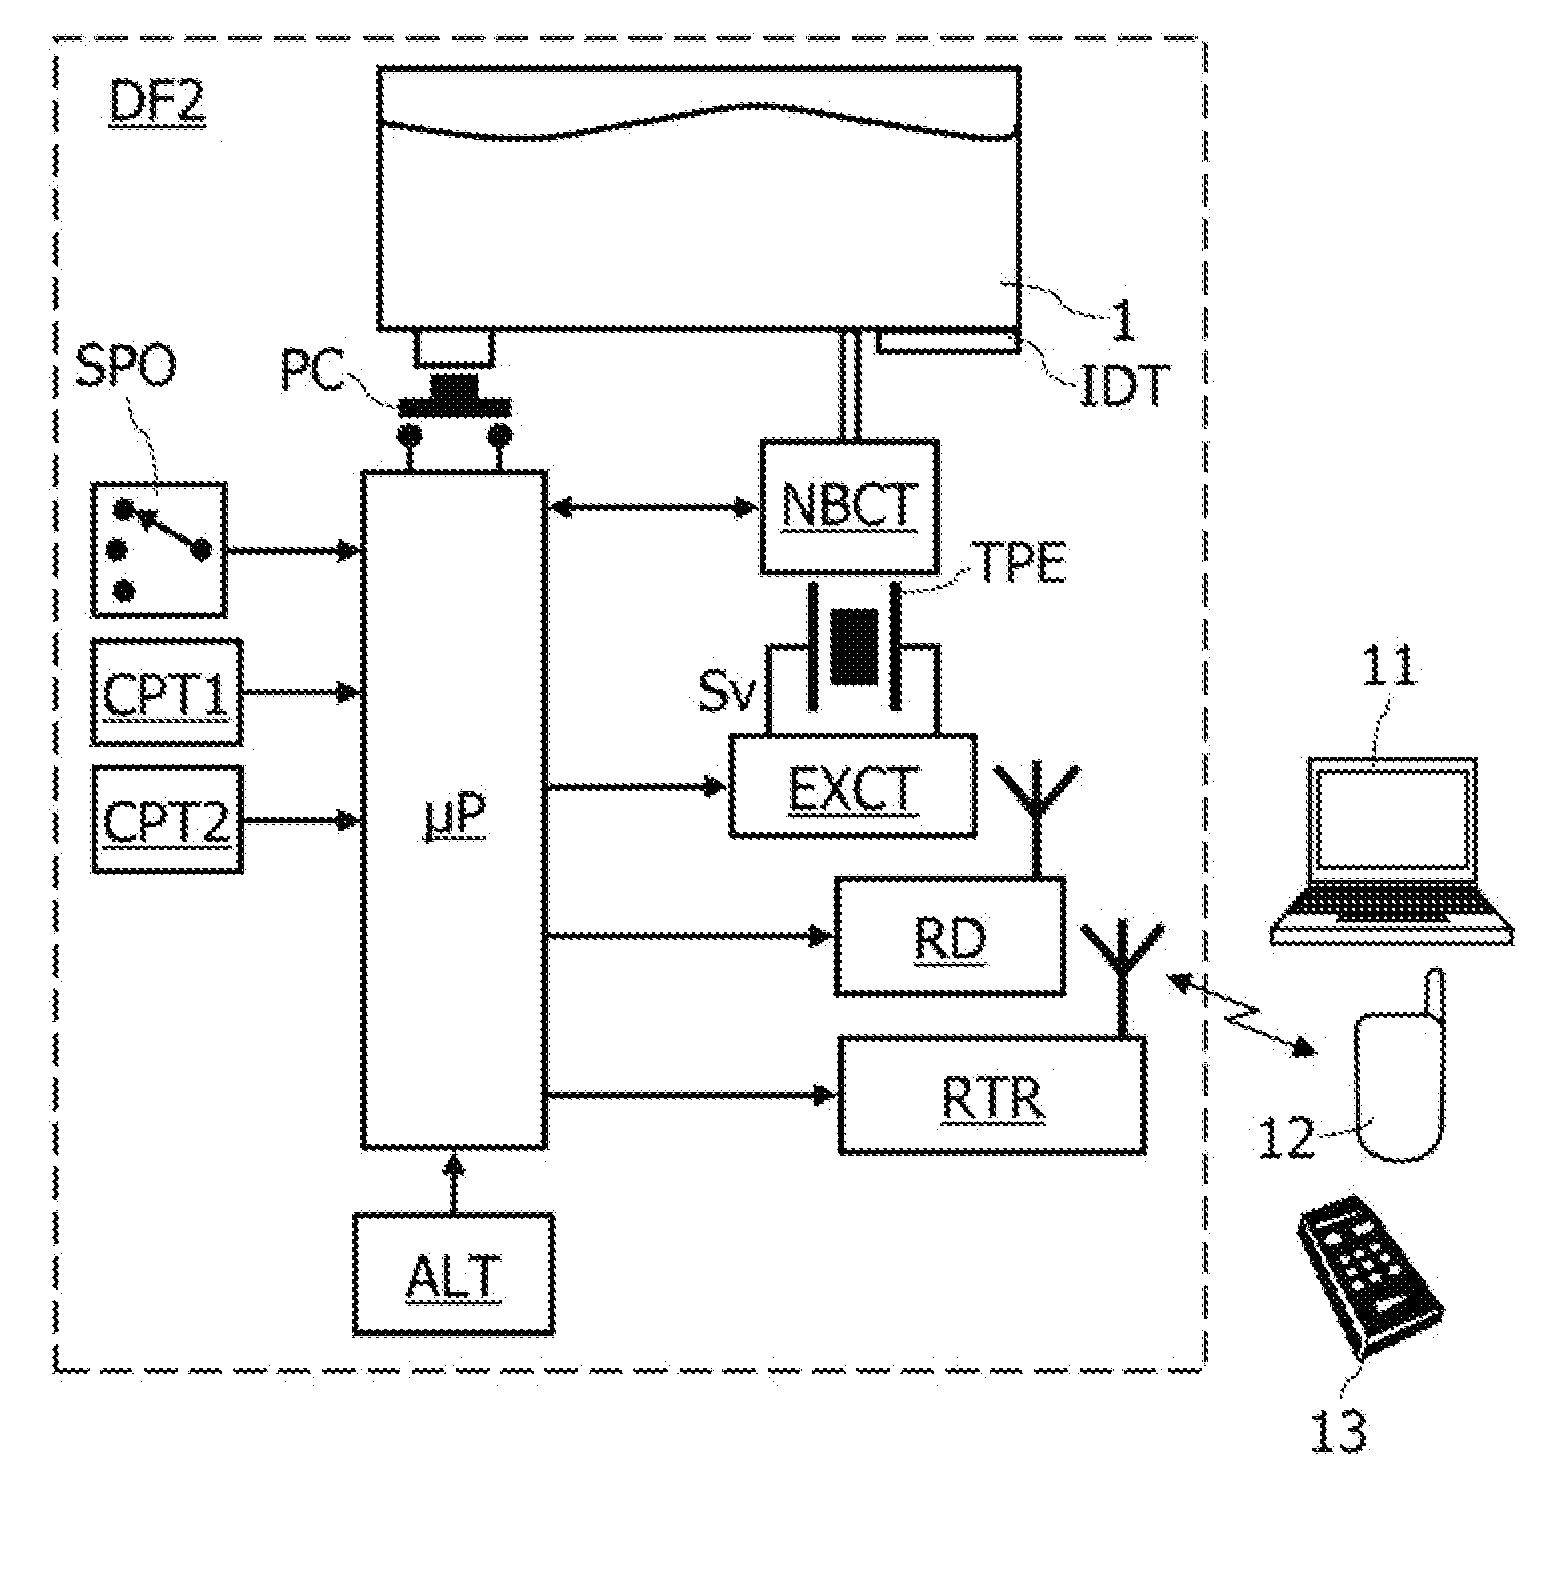 Control method of a device for nebulizing liquids into the air